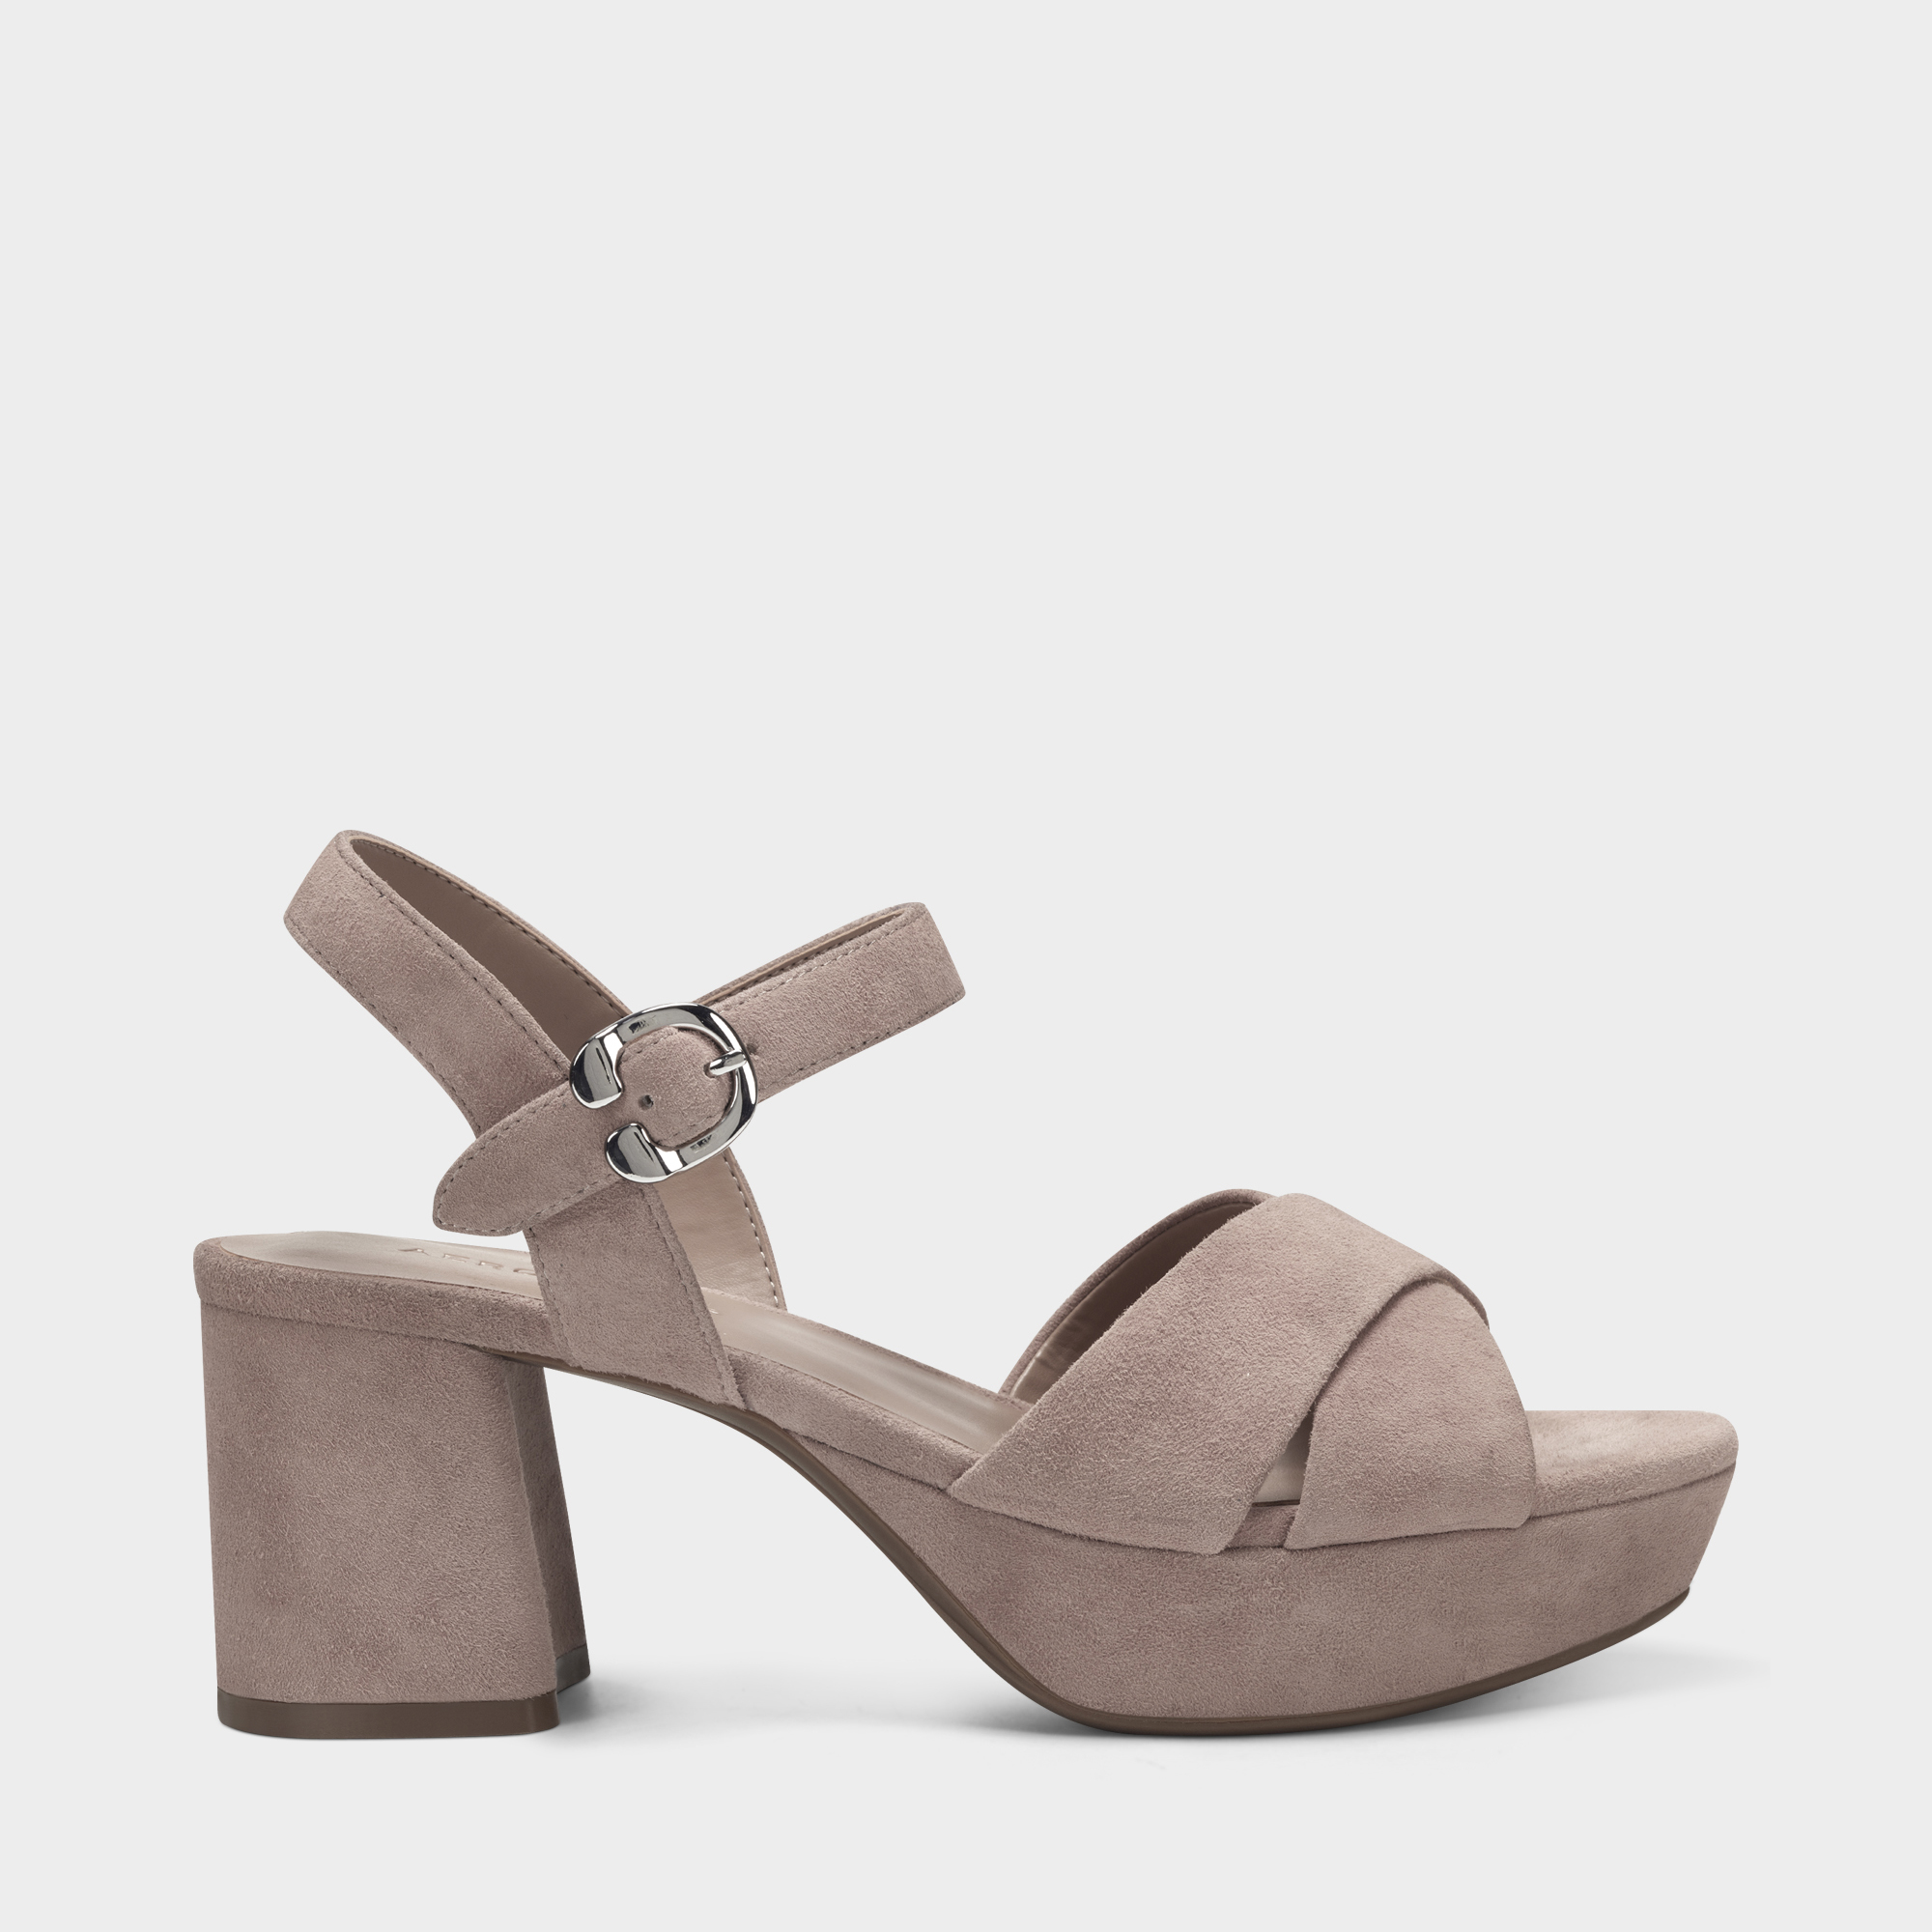 Cosmos Sandal in Blush Suede